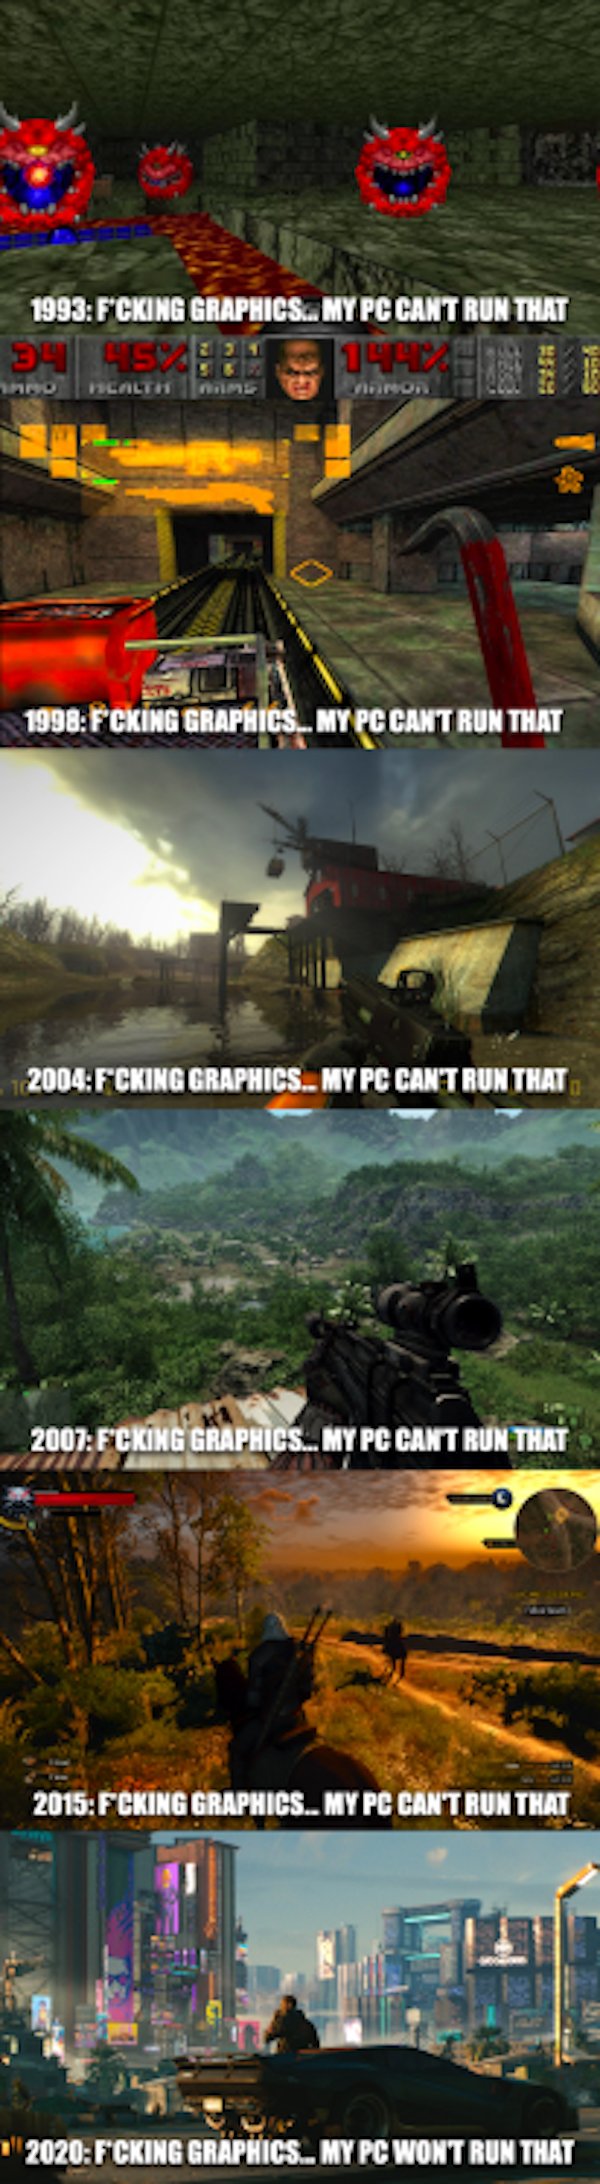 Pictures And Memes For Gamers (46 pics)